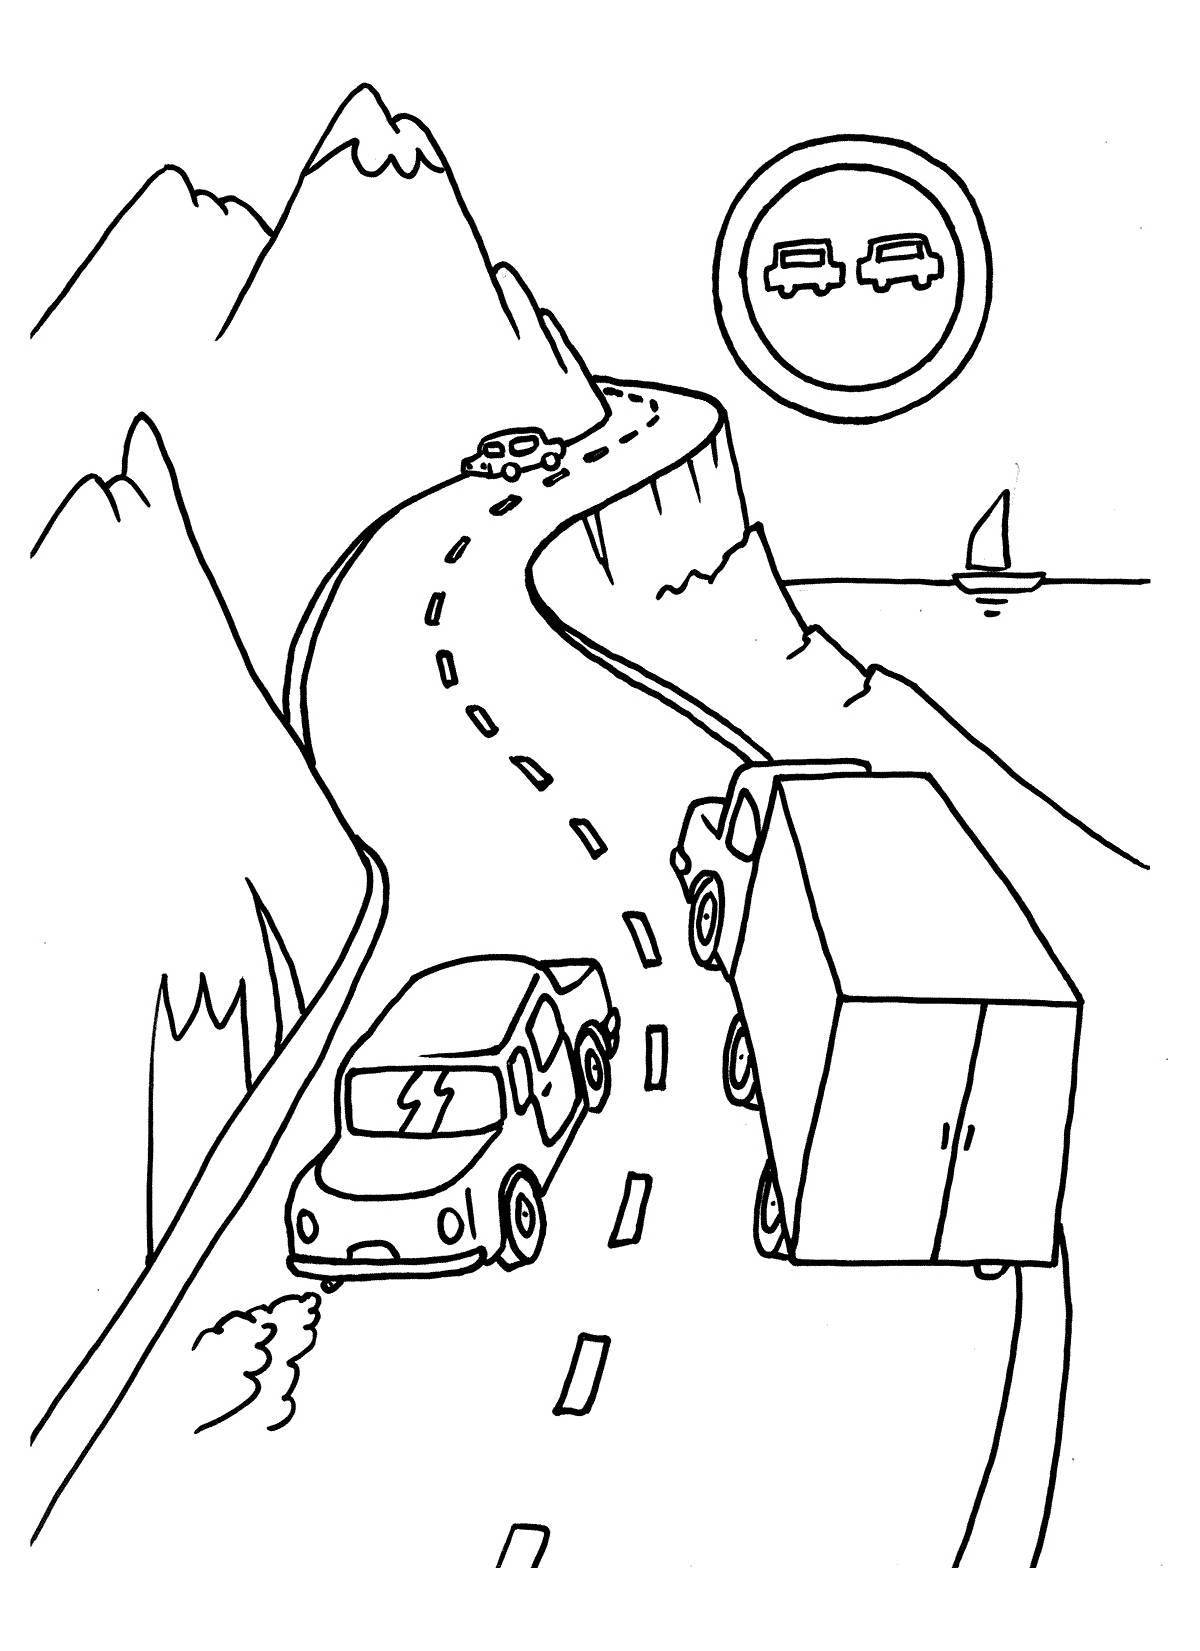 Shiny winter road coloring book for kids